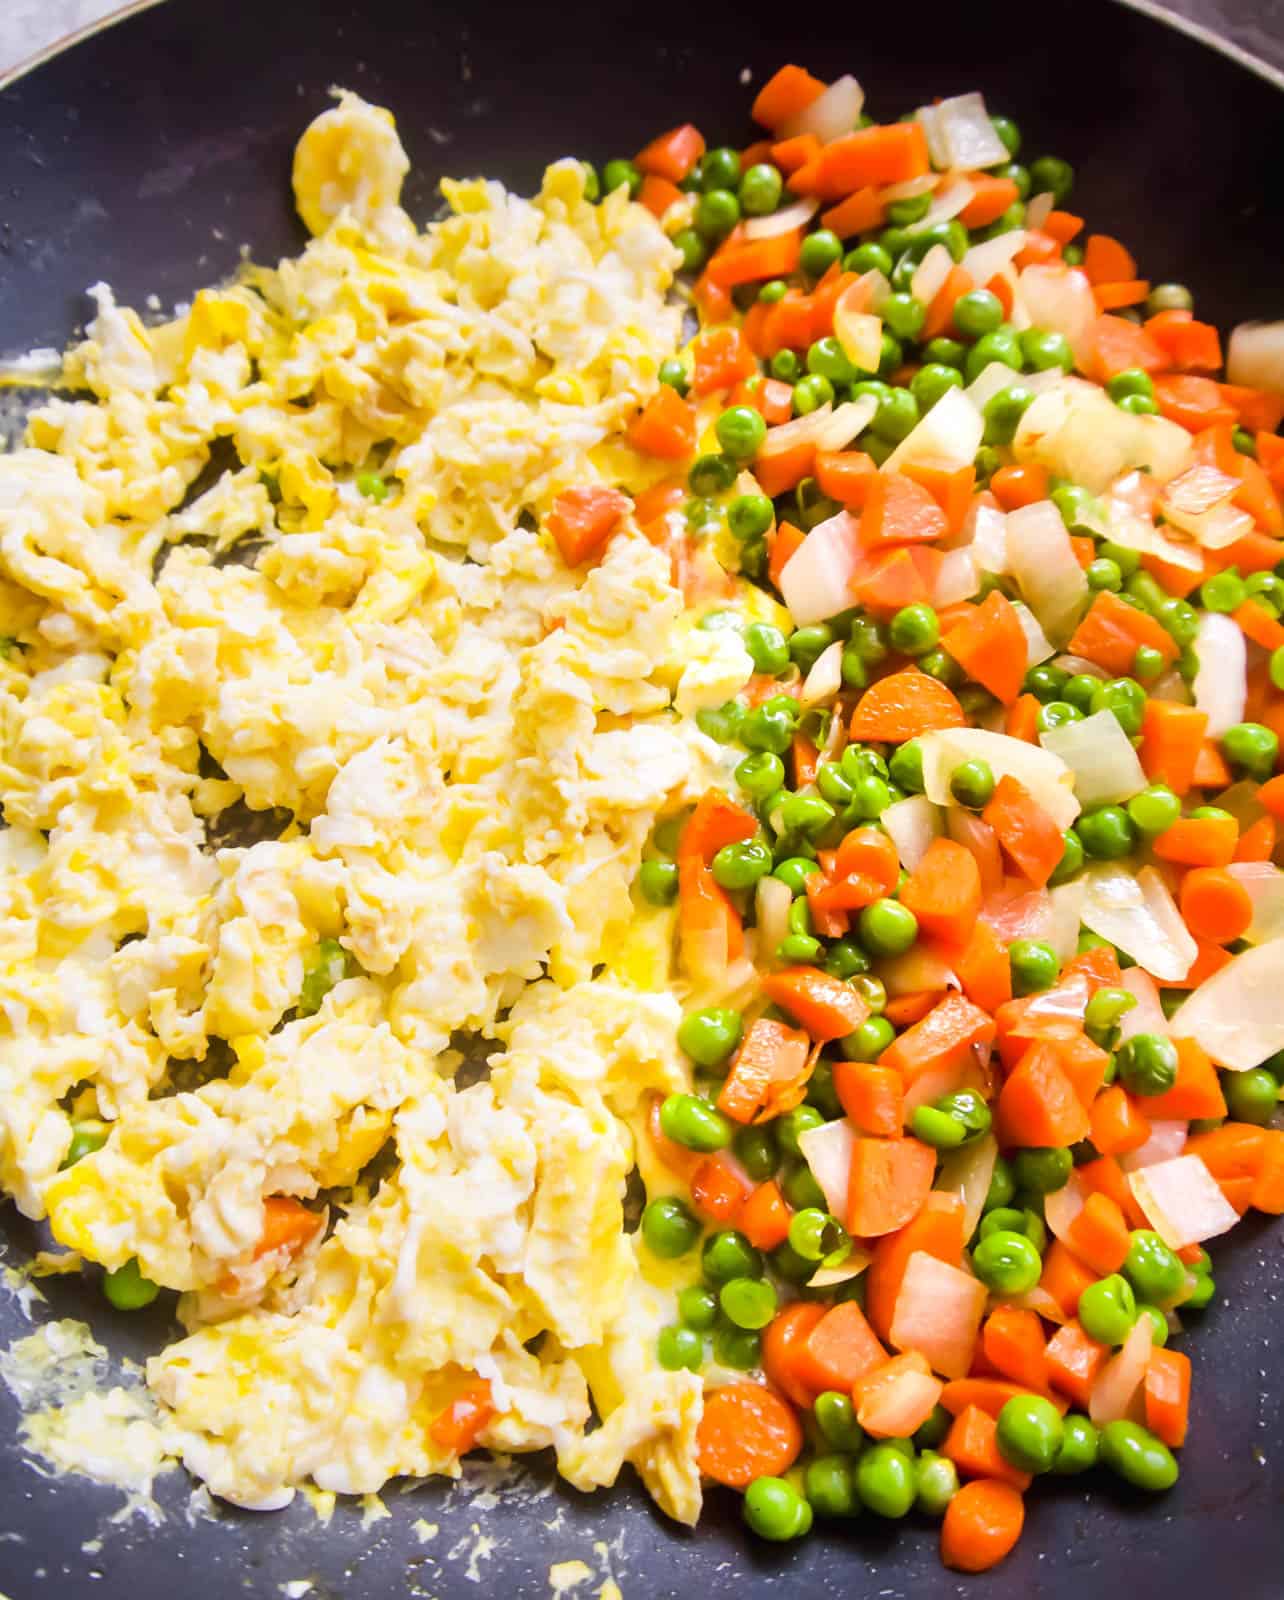 Half the frying pan with scrambled eggs and half with carrots and peas.